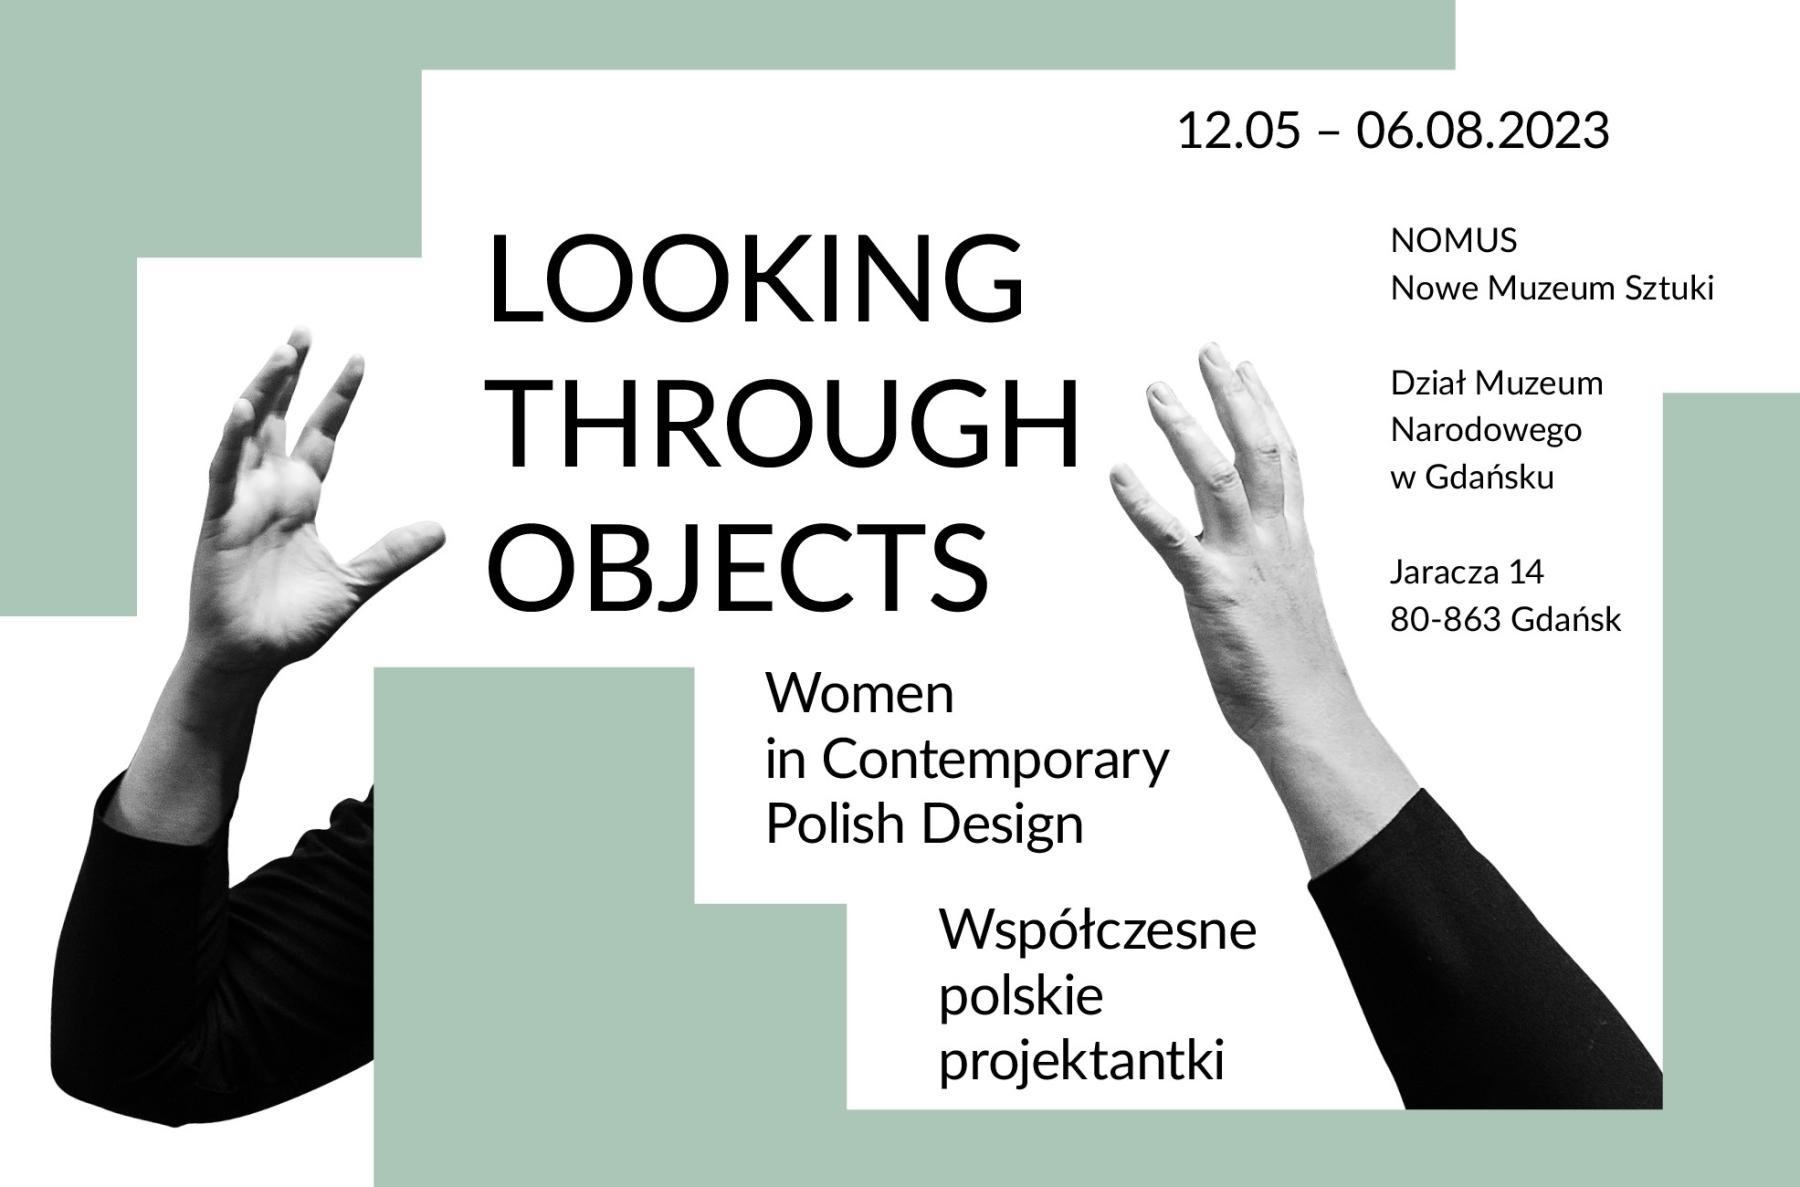 LOOKING THROUGH OBJECTS. WOMEN IN CONTEMPORARY POLISH DESIGN